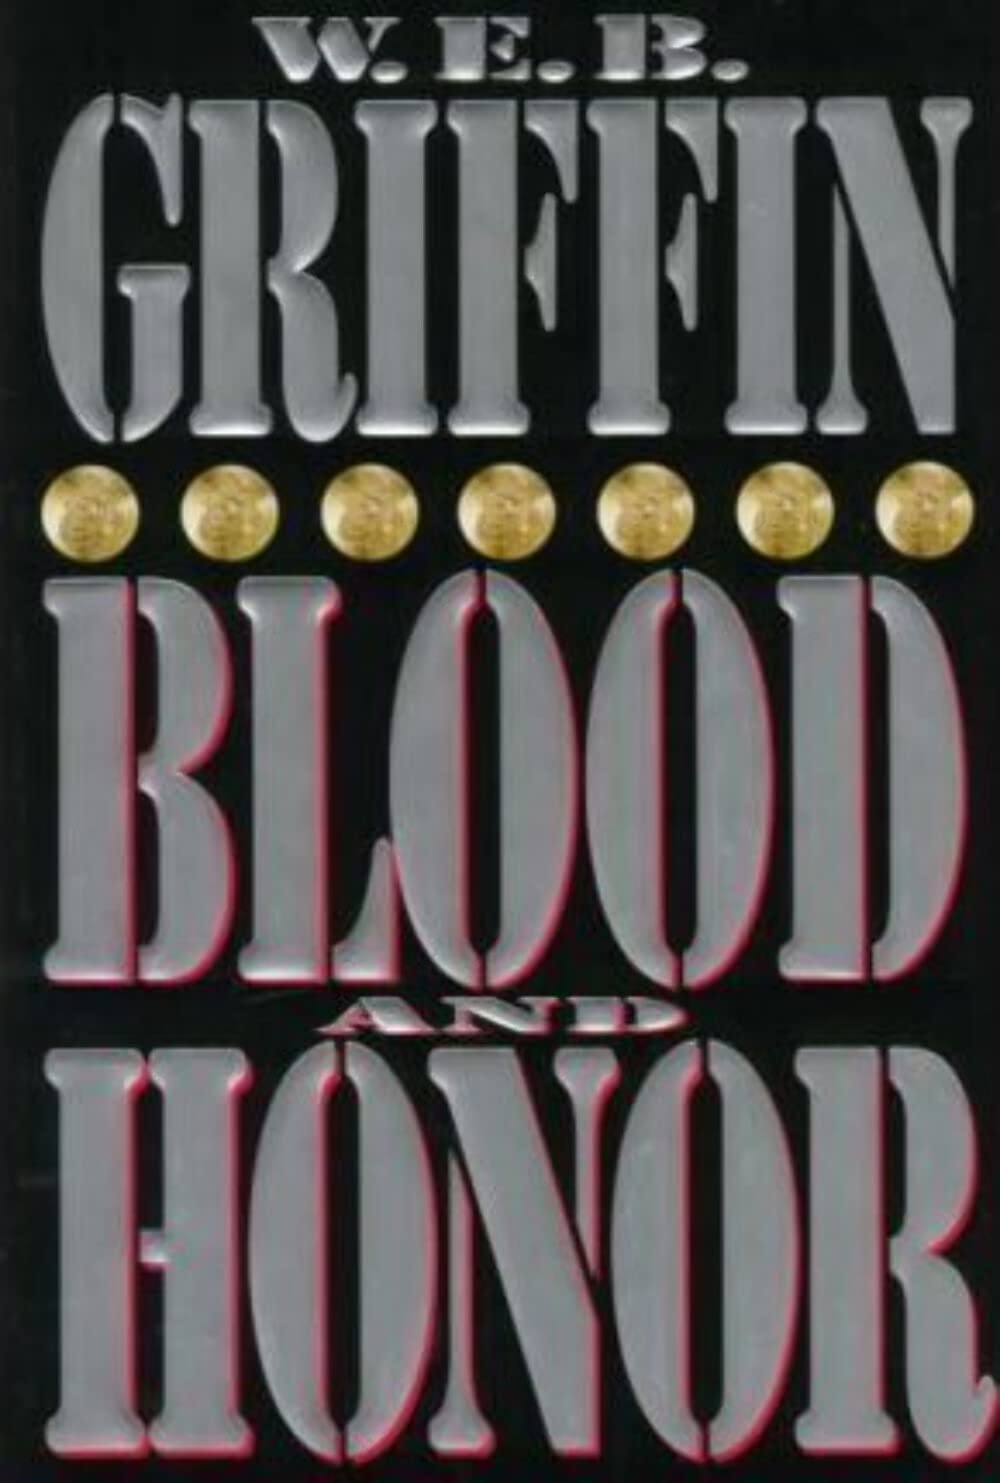 Blood and Honor - W. E. B. Griifin